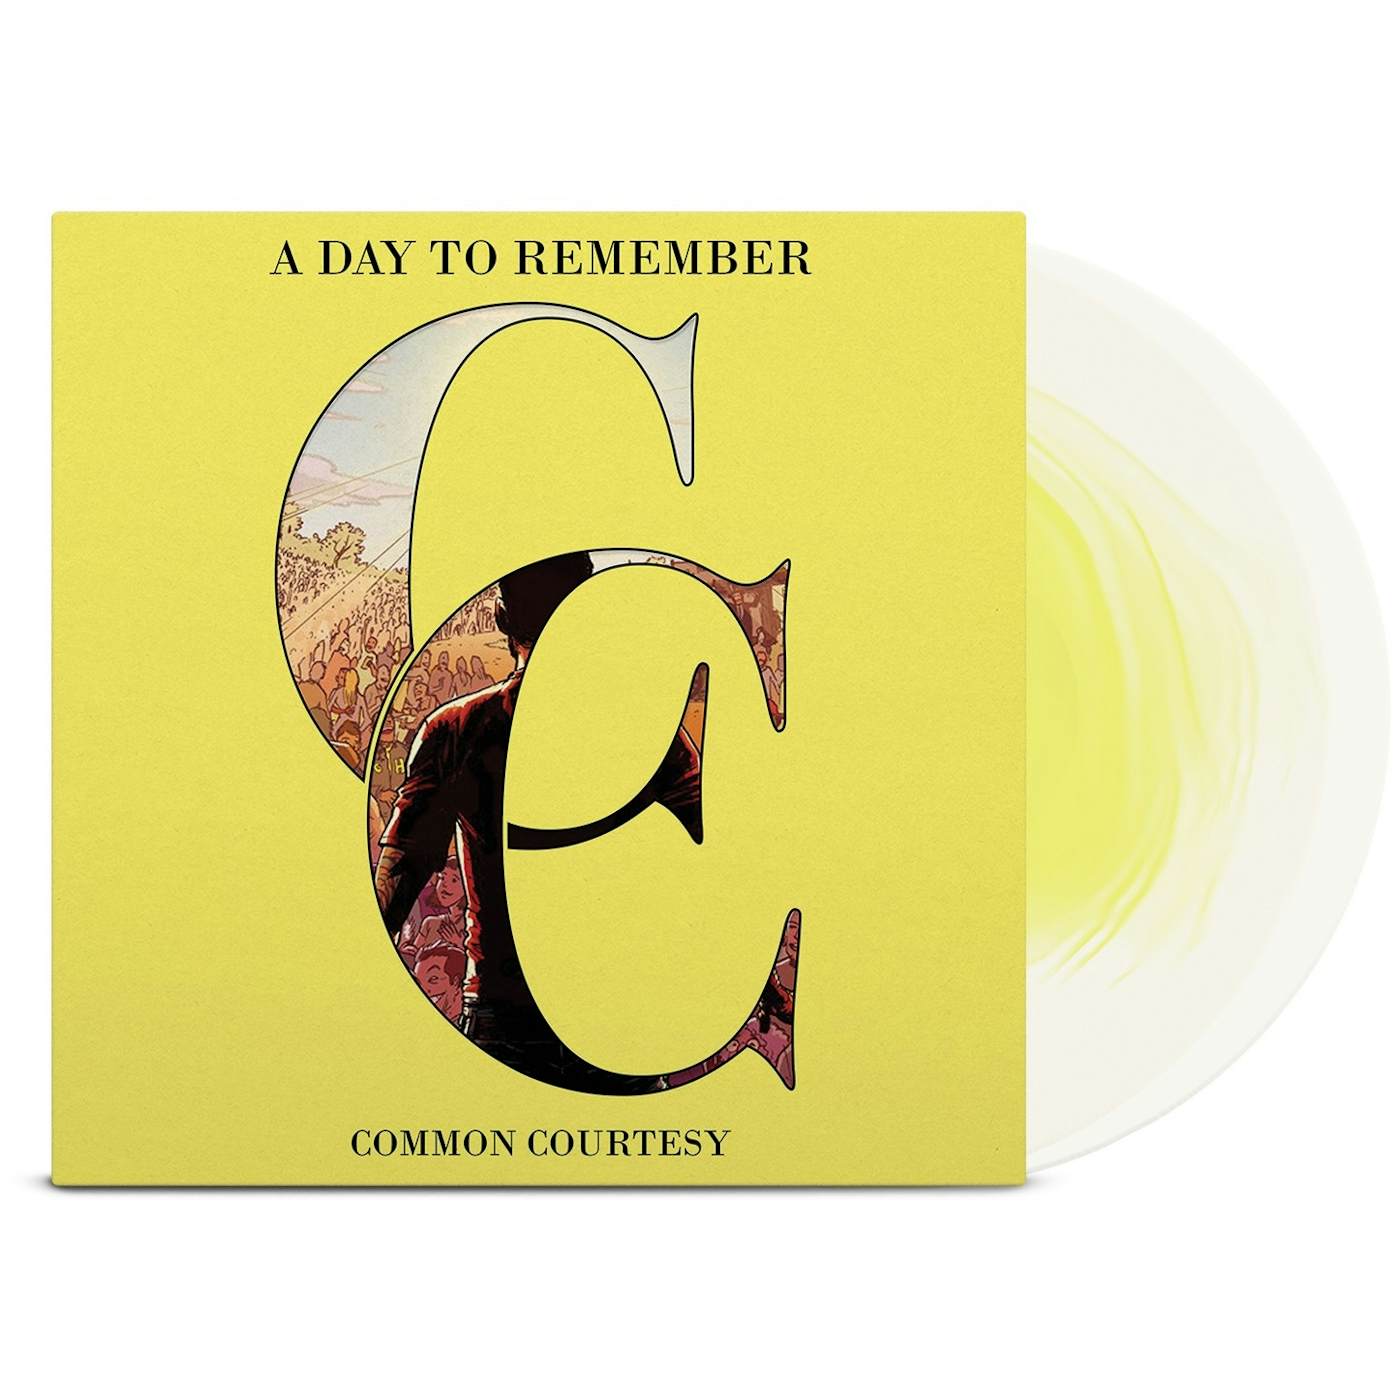 A Day To Remember Common Courtesy (Lemon & Milky Clear) Vinyl Record